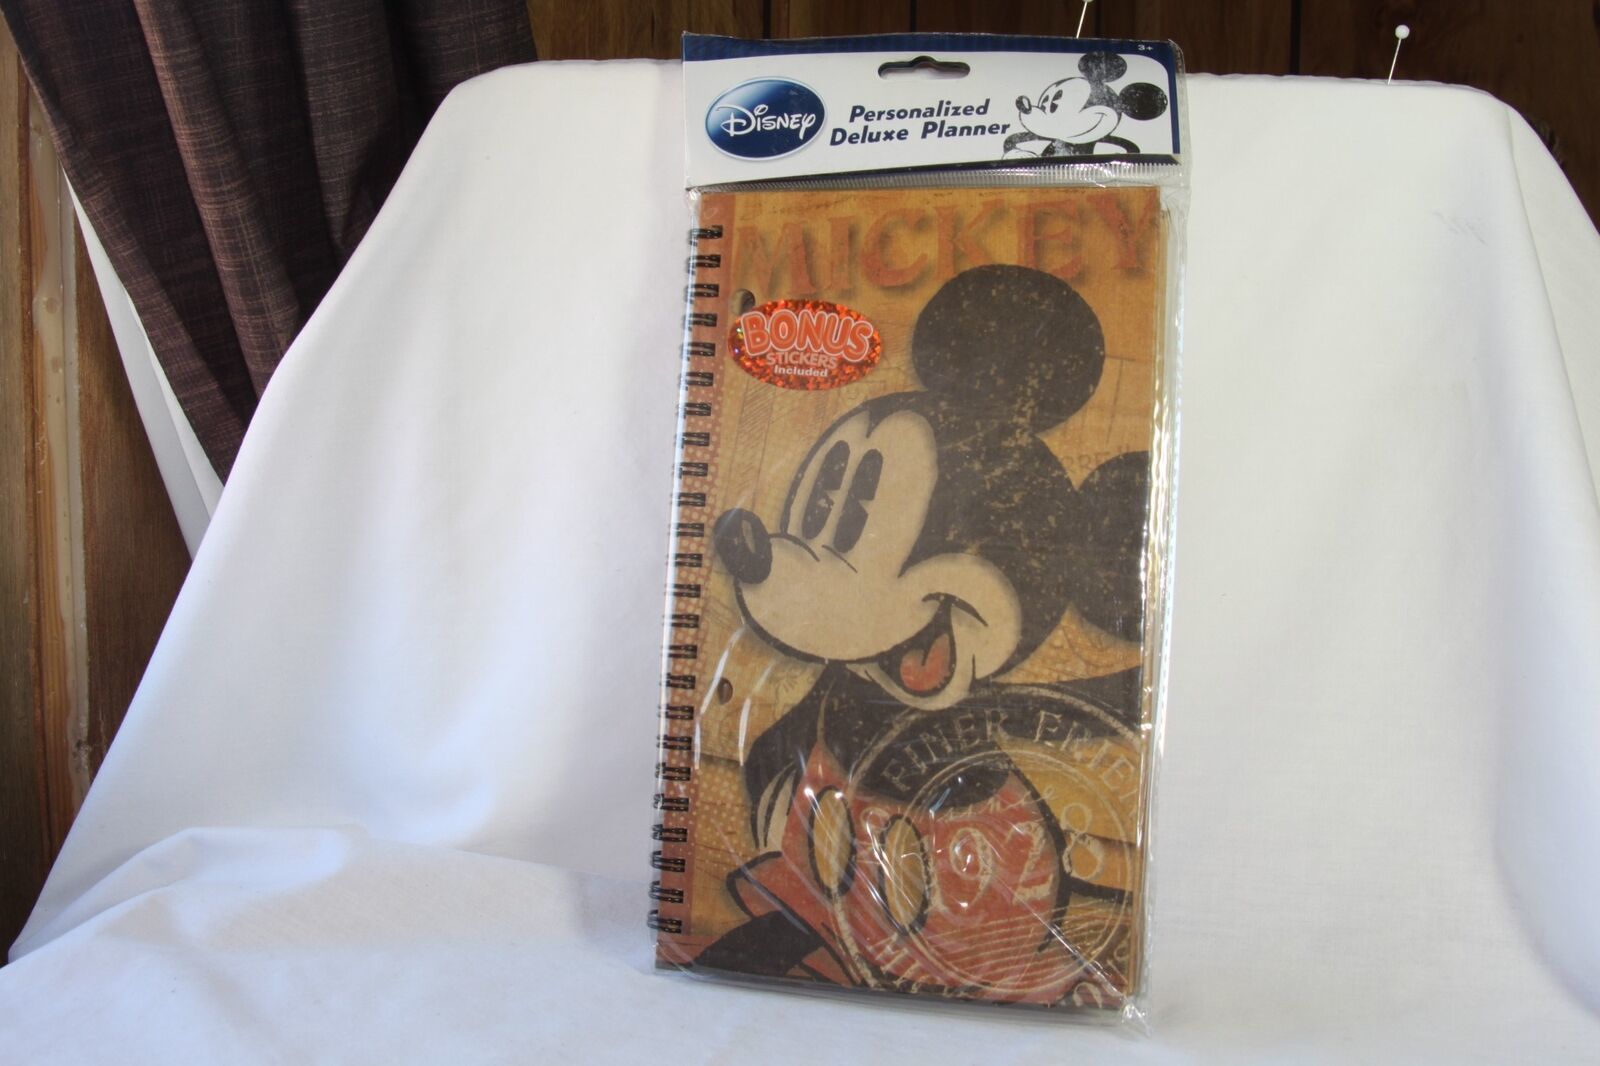 Disney Planner (new) PERSONALIZED DELUXE PLANNER - MICKEY -SPIRAL - 8.5" TALL - $15.98